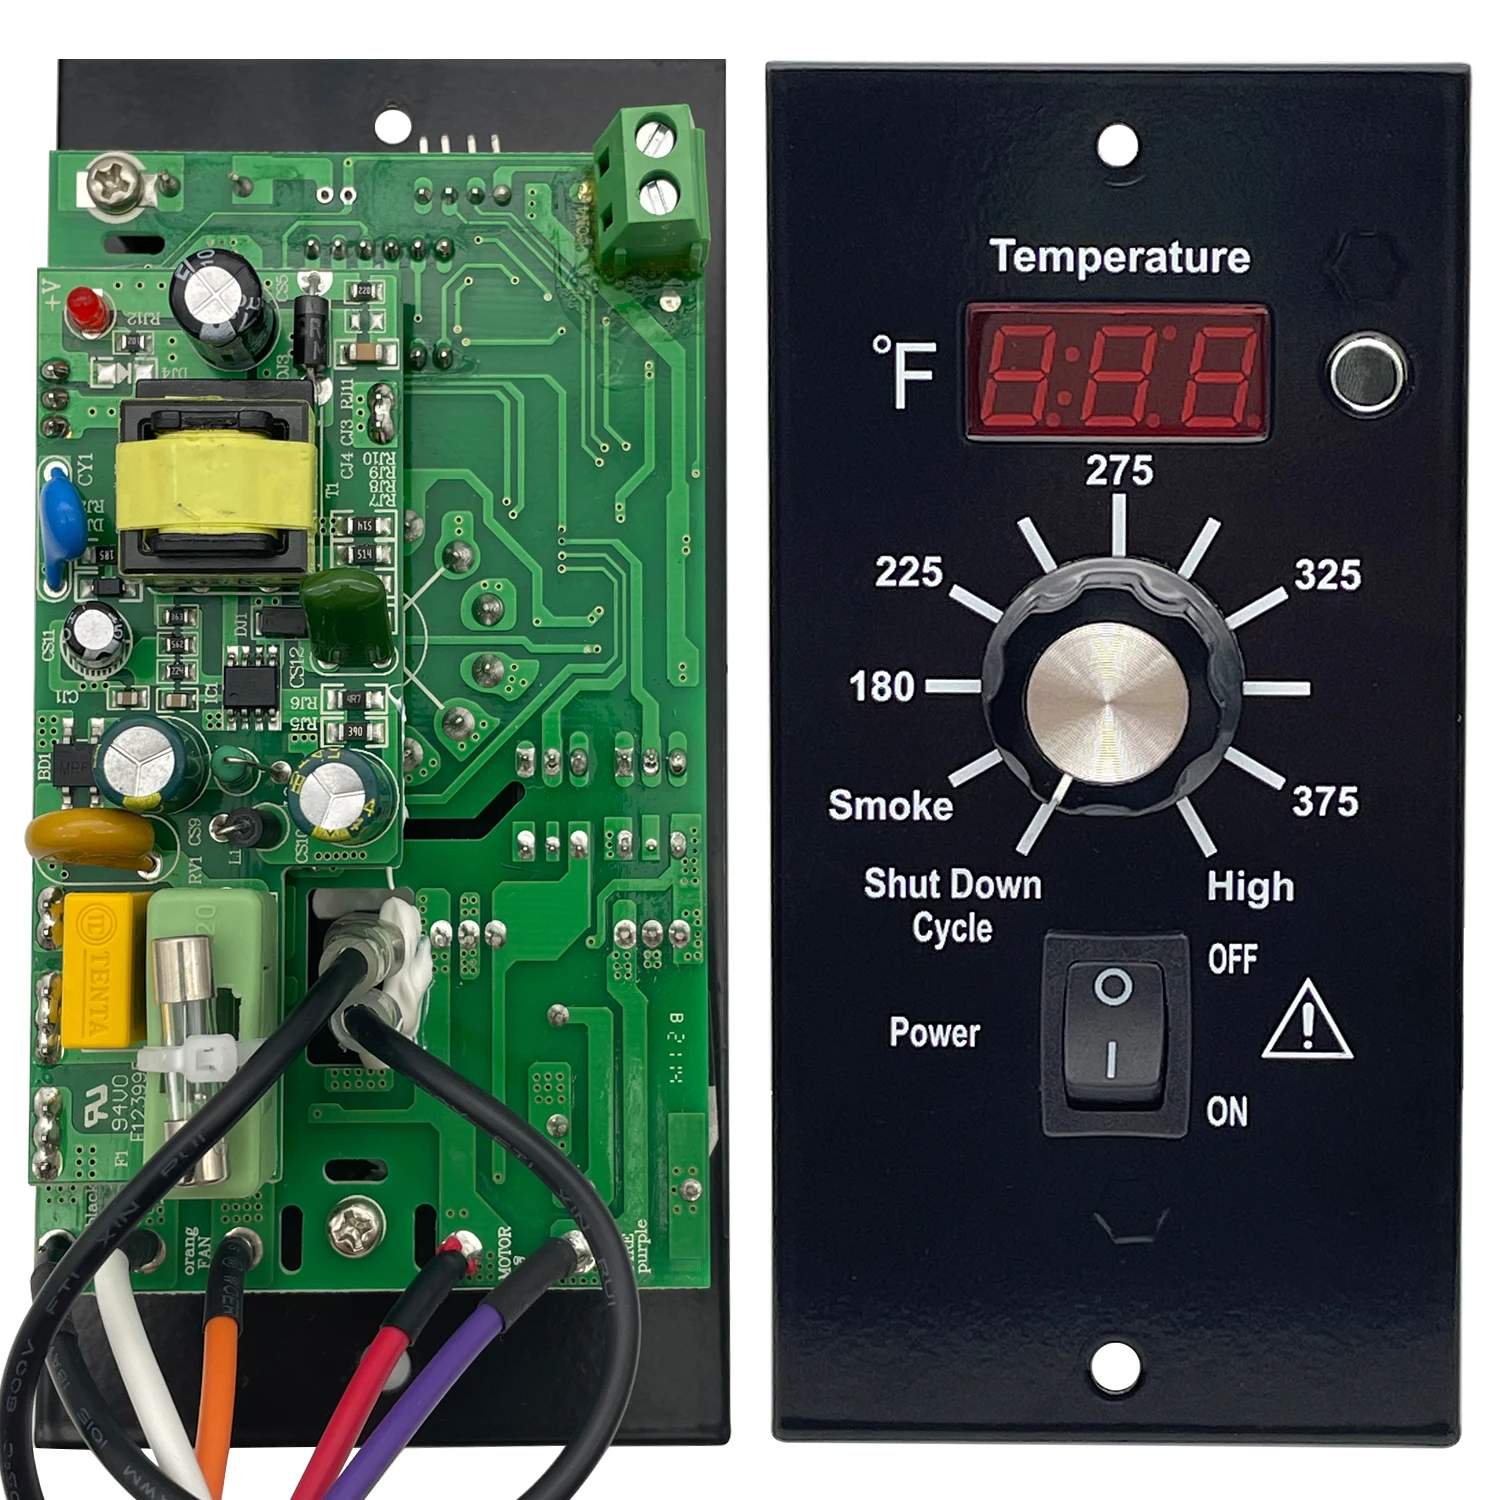 https://ae01.alicdn.com/kf/S47e32d9a6bf34d44aaffdbf715e4841fM/Digital-Thermostat-Controller-Kit-Replacement-Part-BAC236-For-Traeger-Pellet-Grills-With-RTD-Temp-Probe-Sensor.jpg